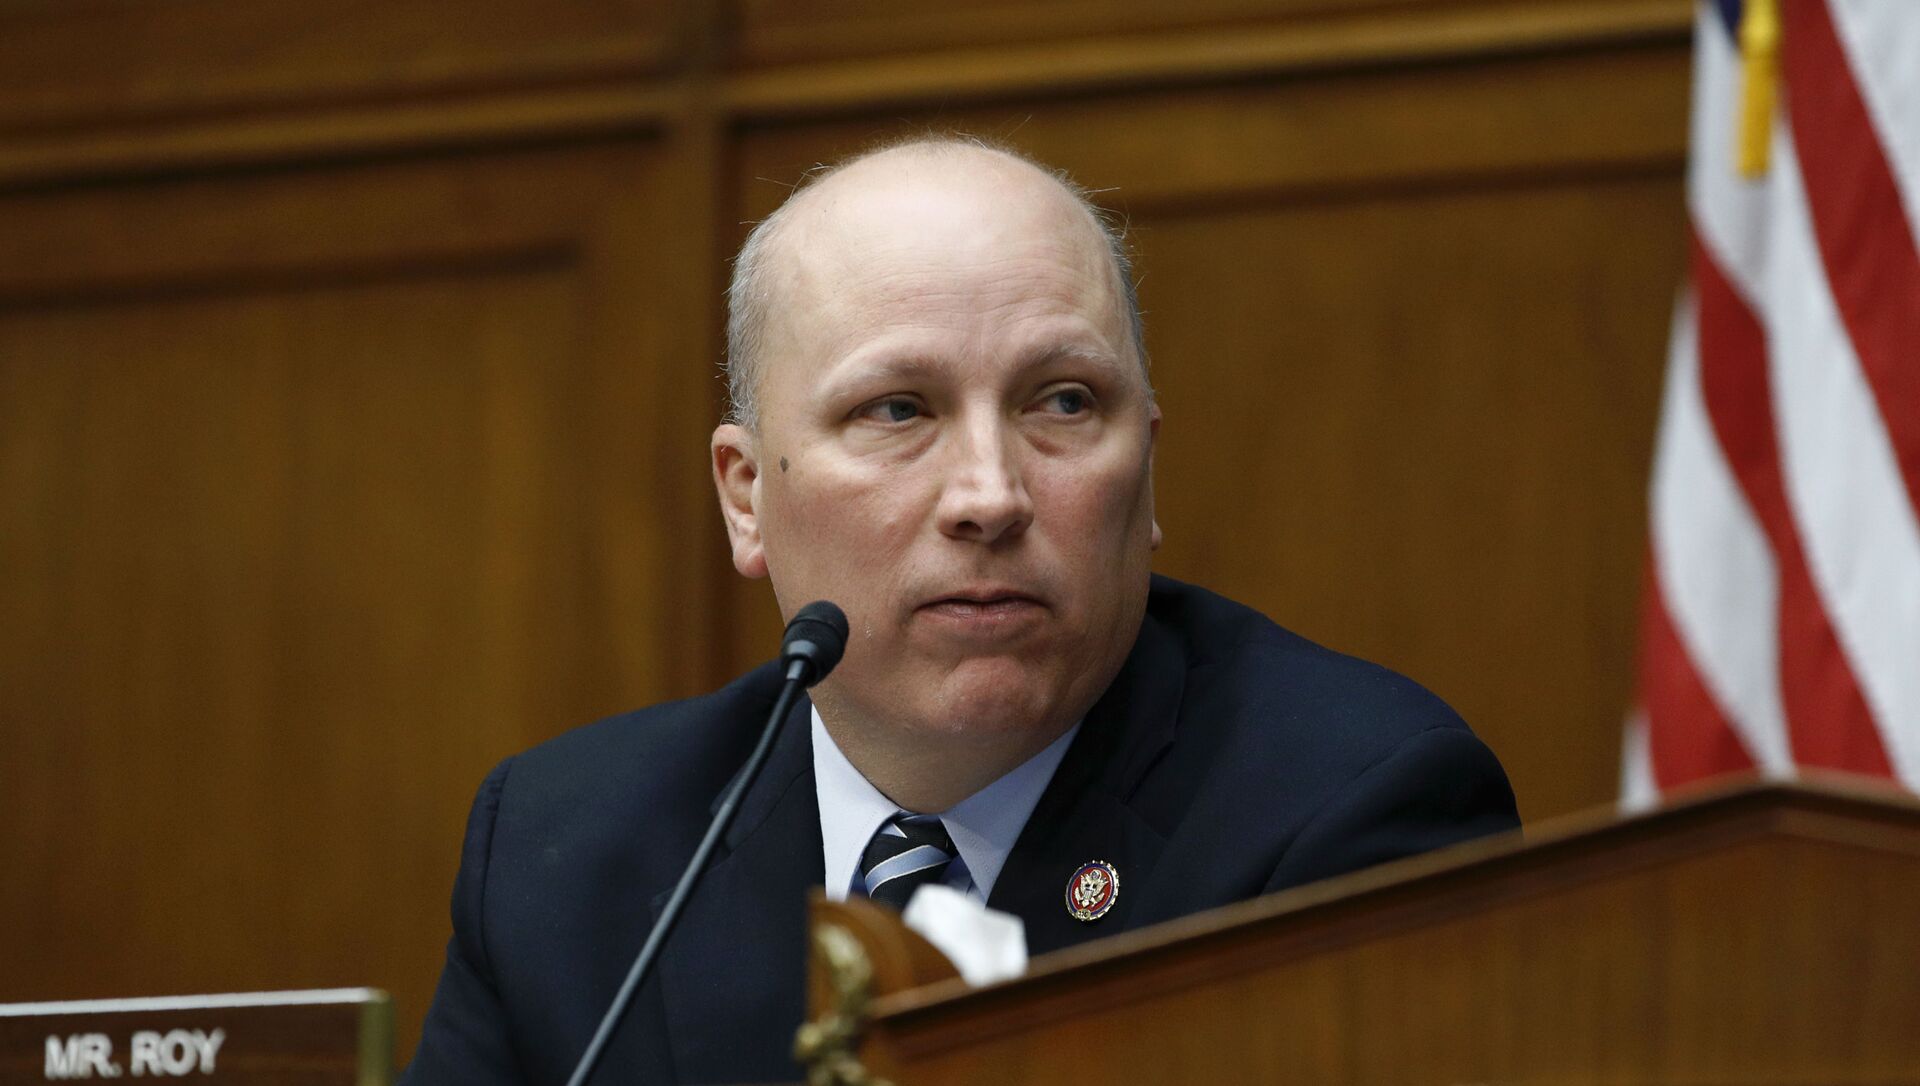 Rep. Chip Roy, R-Texas, speaks during a hearing on preparedness for and response to the coronavirus outbreak on Capitol Hill in Washington, Wednesday, March 11, 2020. - Sputnik International, 1920, 18.03.2021